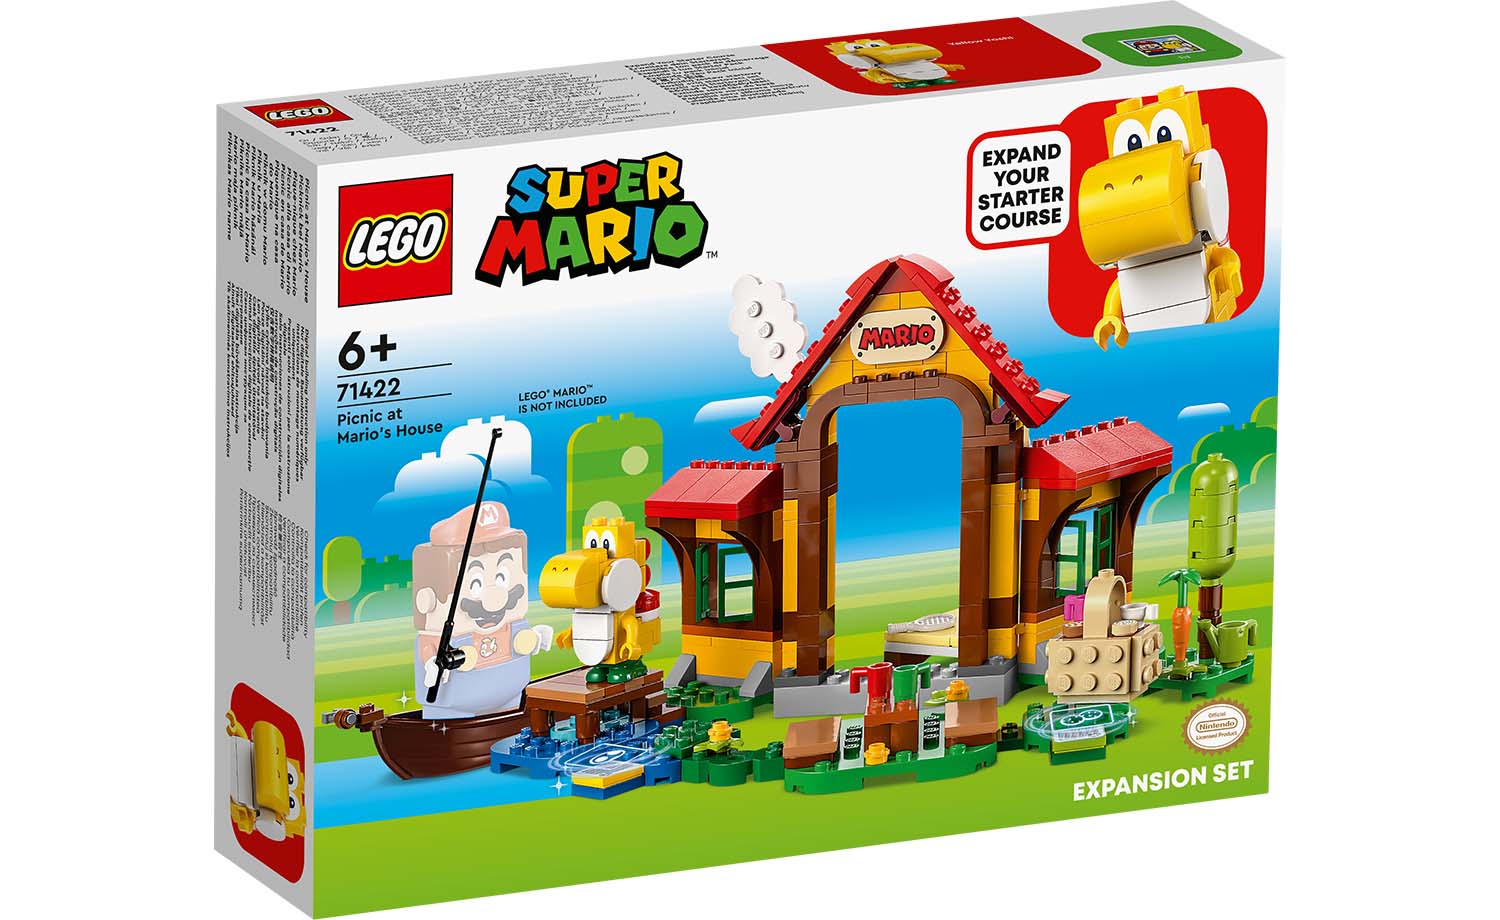 Toy Review: LEGO Super Mario - The First Interactive LCD LEGO